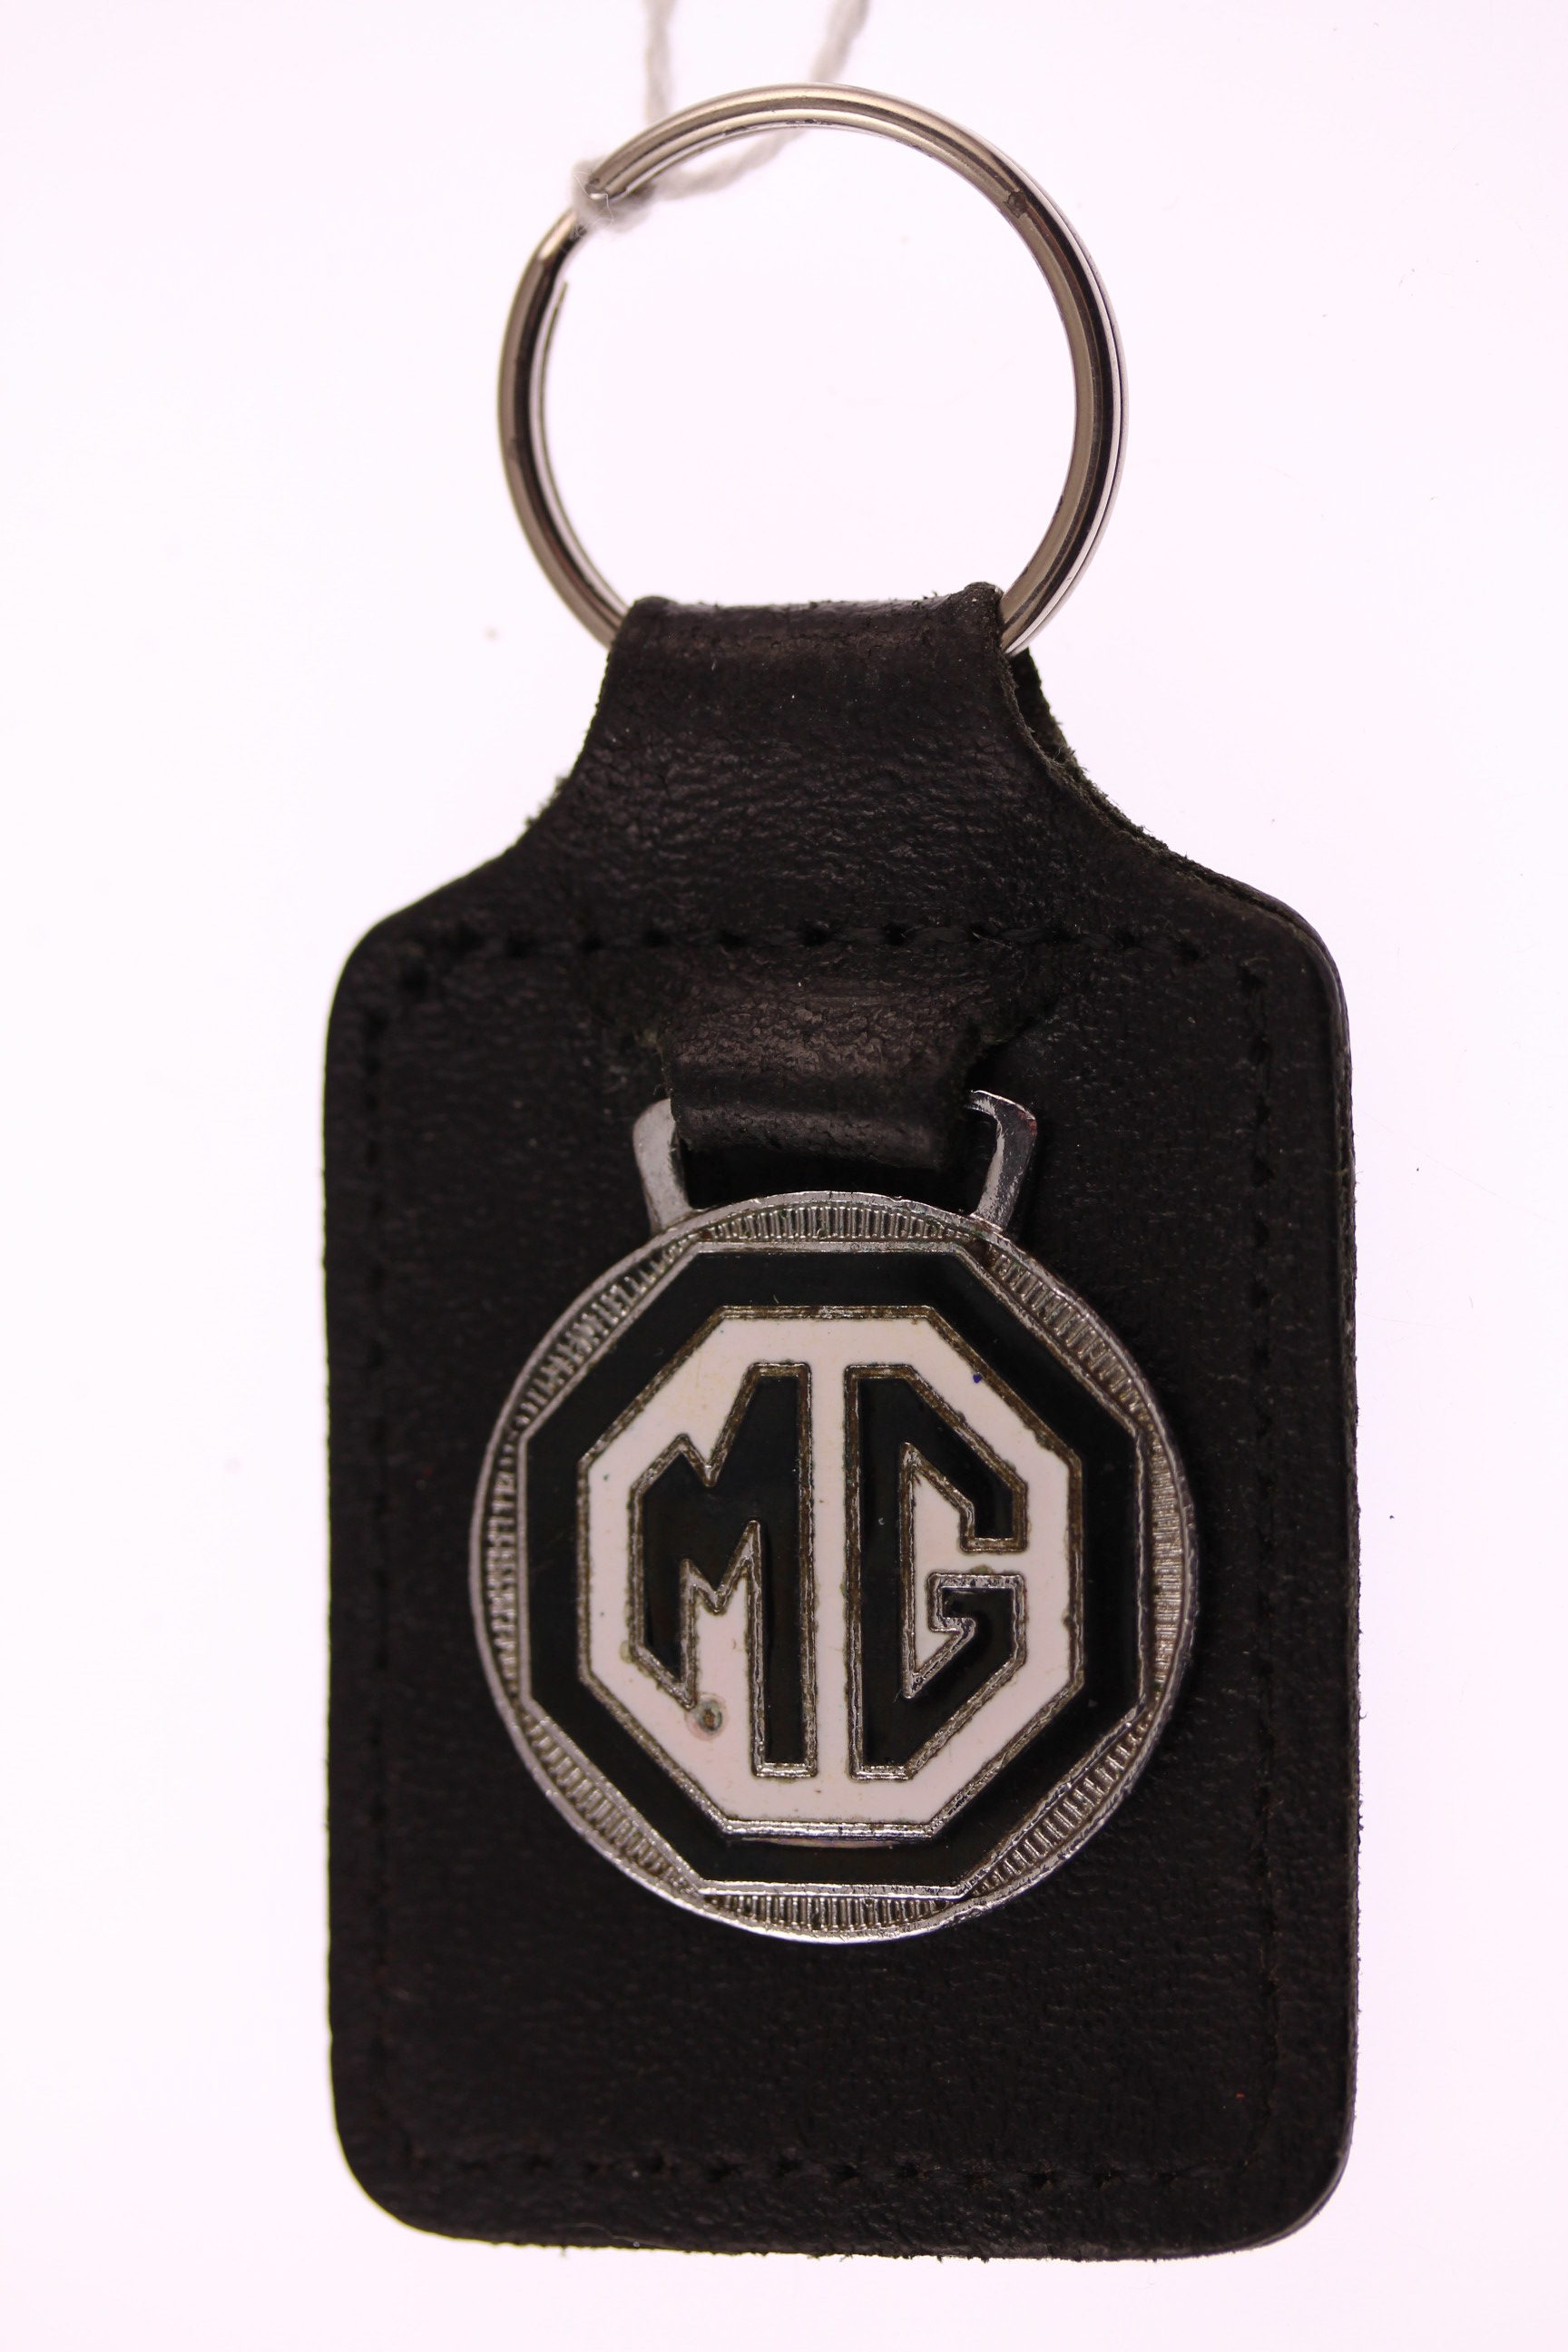 MG ( MGB ) – original vintage late 1960s keyring – Classic Leather Fobs